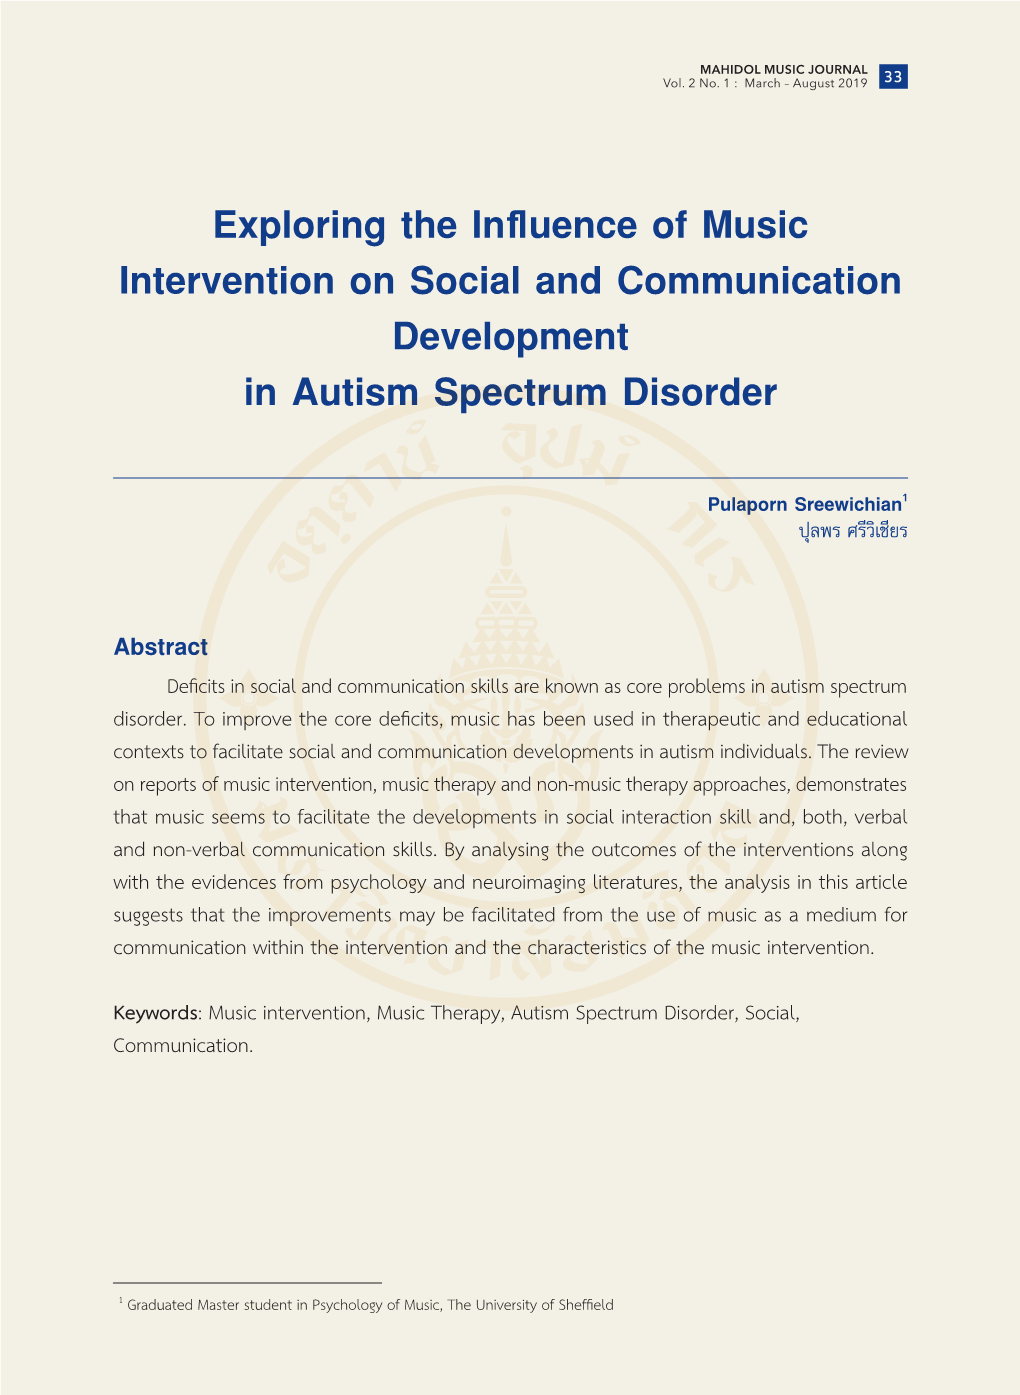 Exploring the Influence of Music Intervention on Social and Communication Development in Autism Spectrum Disorder